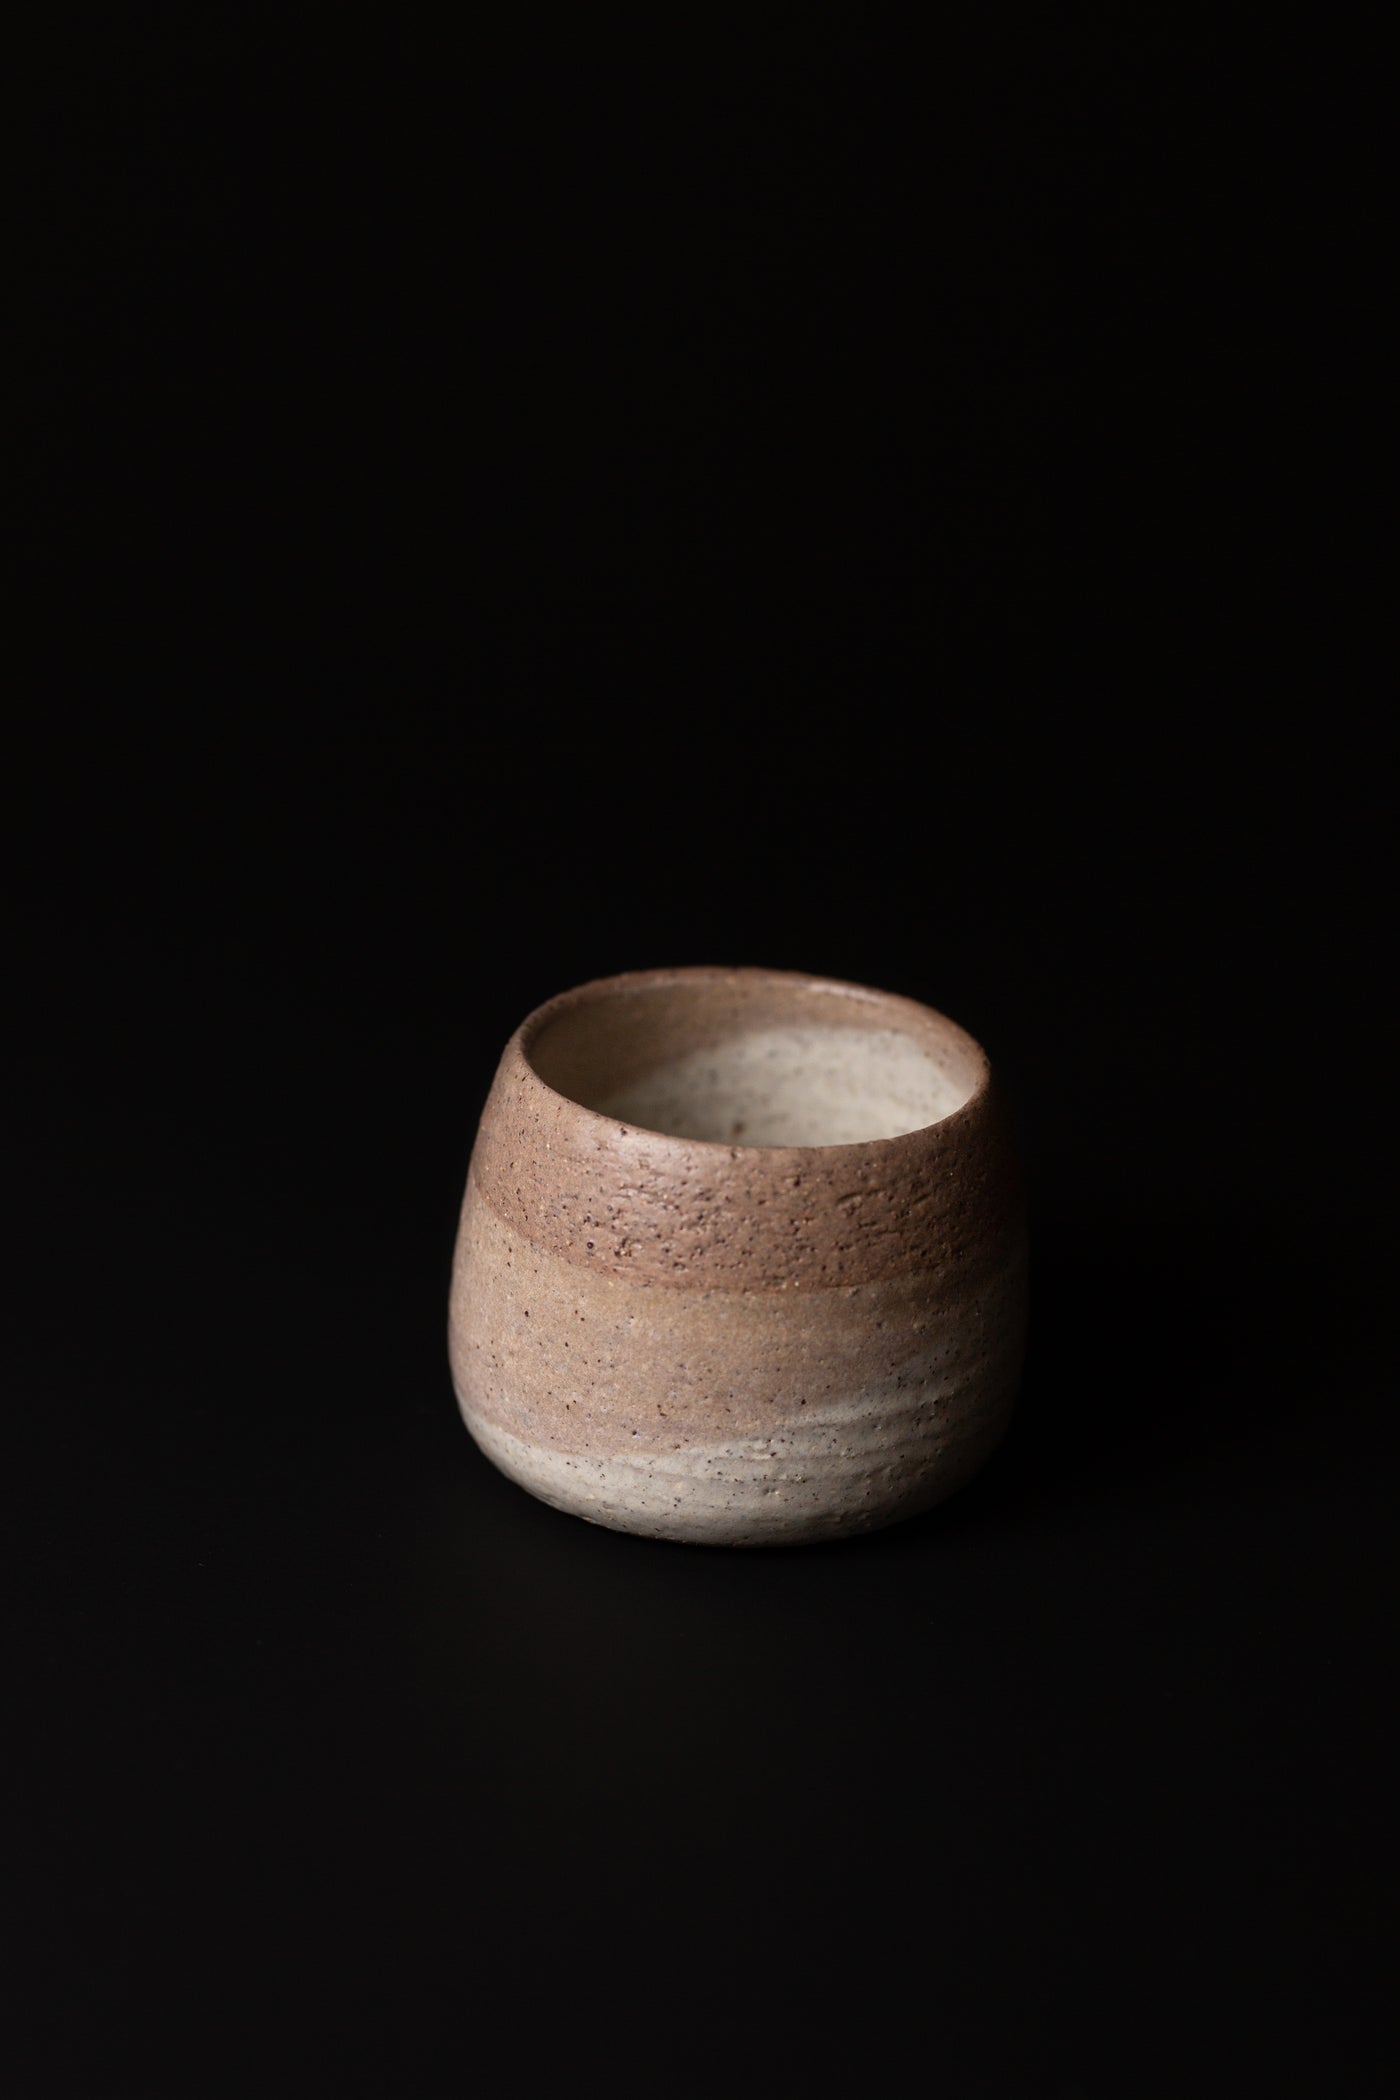 Handmade organic cup in earthy tones. A natural, handcrafted homeware piece made in Melbourne. Katrina is deeply inspired by sustainability. Type: Tumbler, Cup  Material: Stoneware  Dimensions: 100 x 80mm   300mls